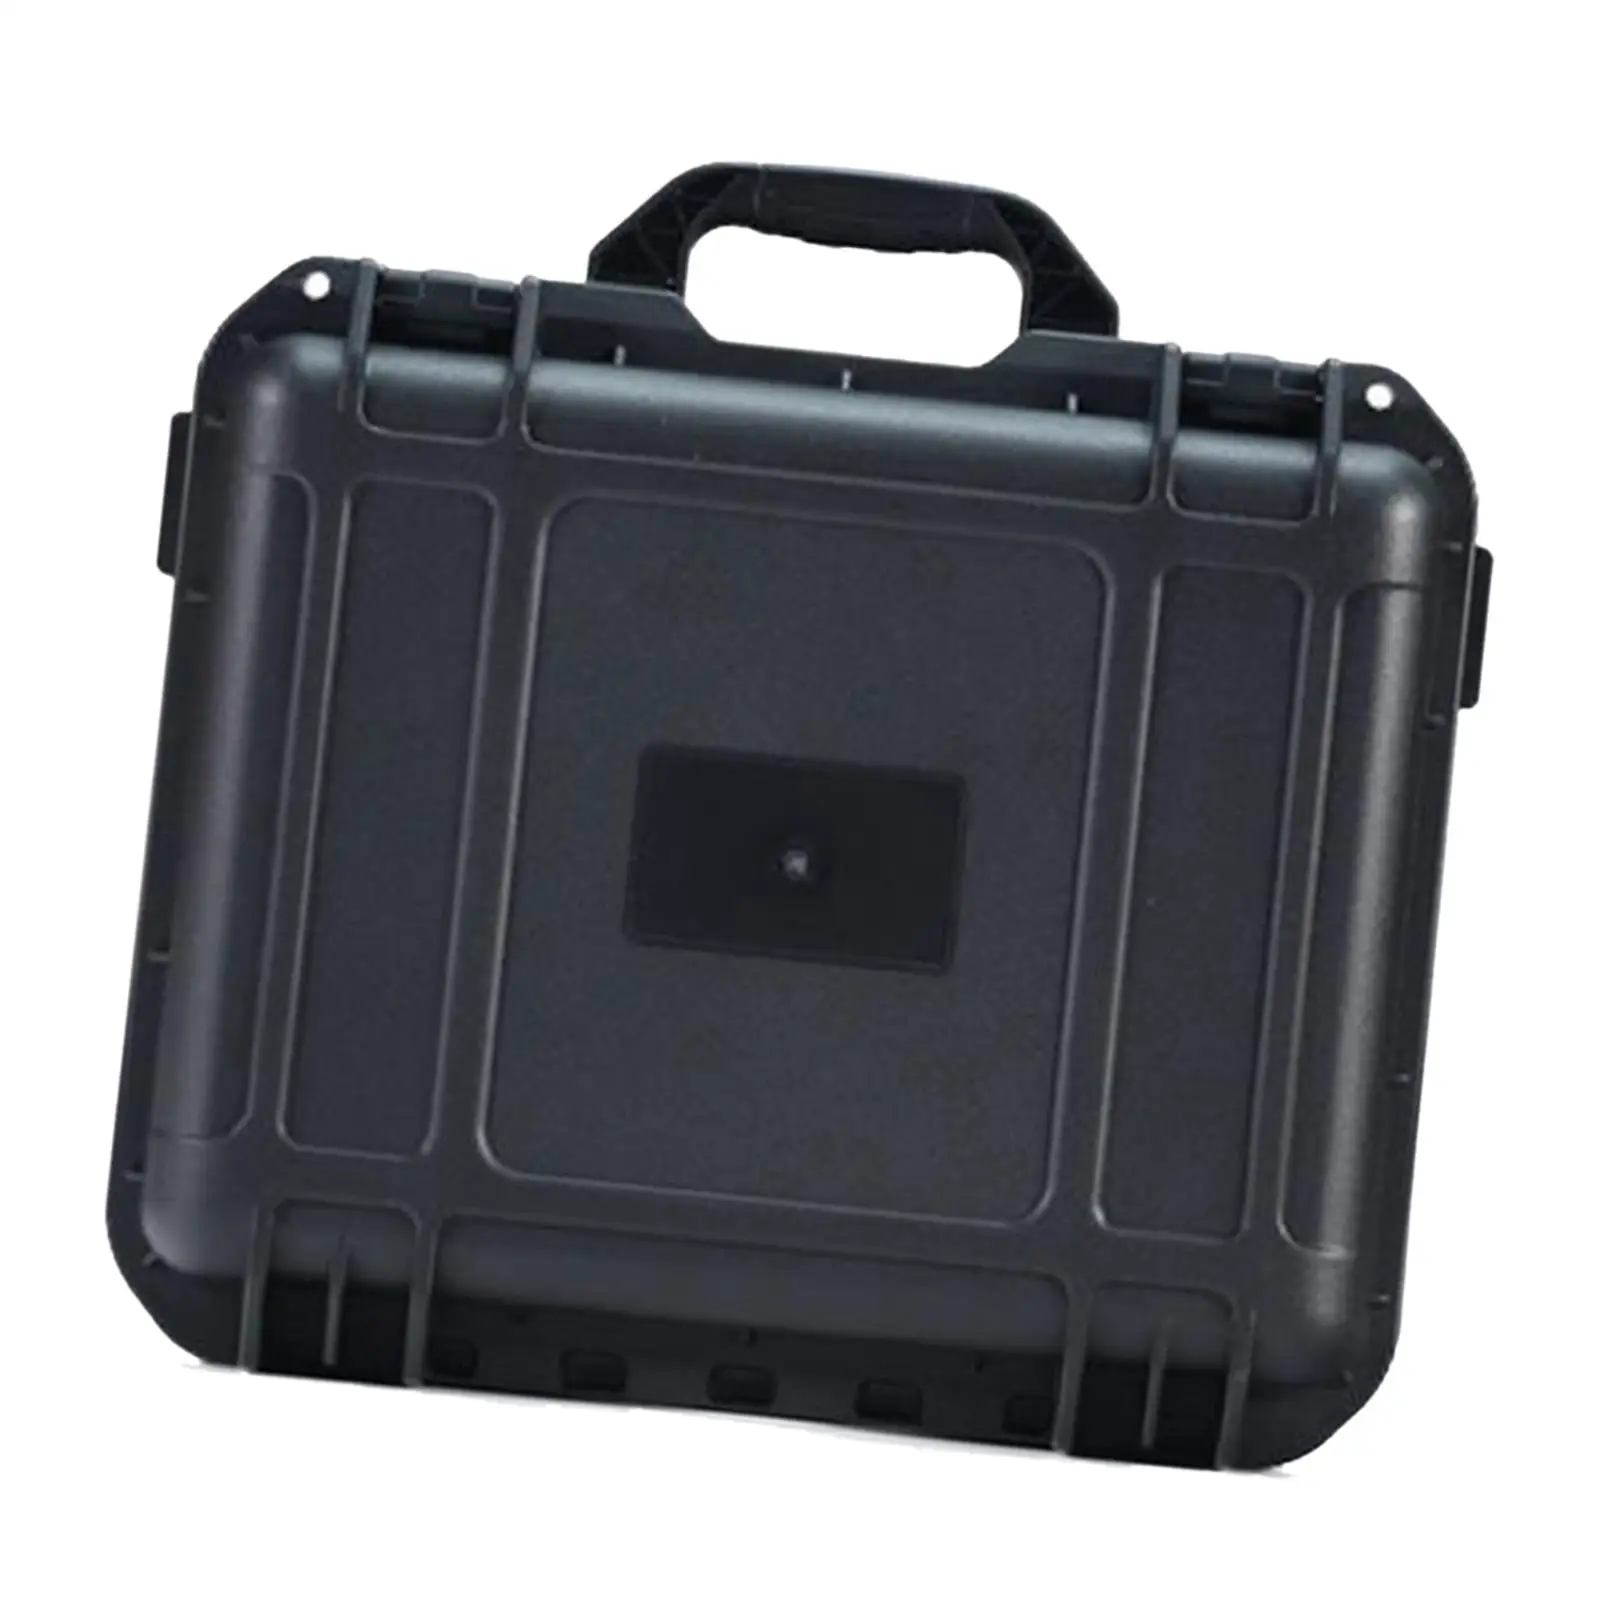 Portable Drone Carrying Case Travel Case Storage Box Shockproof Suitcaseg Storage Bag for DJI Mini 3 Pro Protector Parts